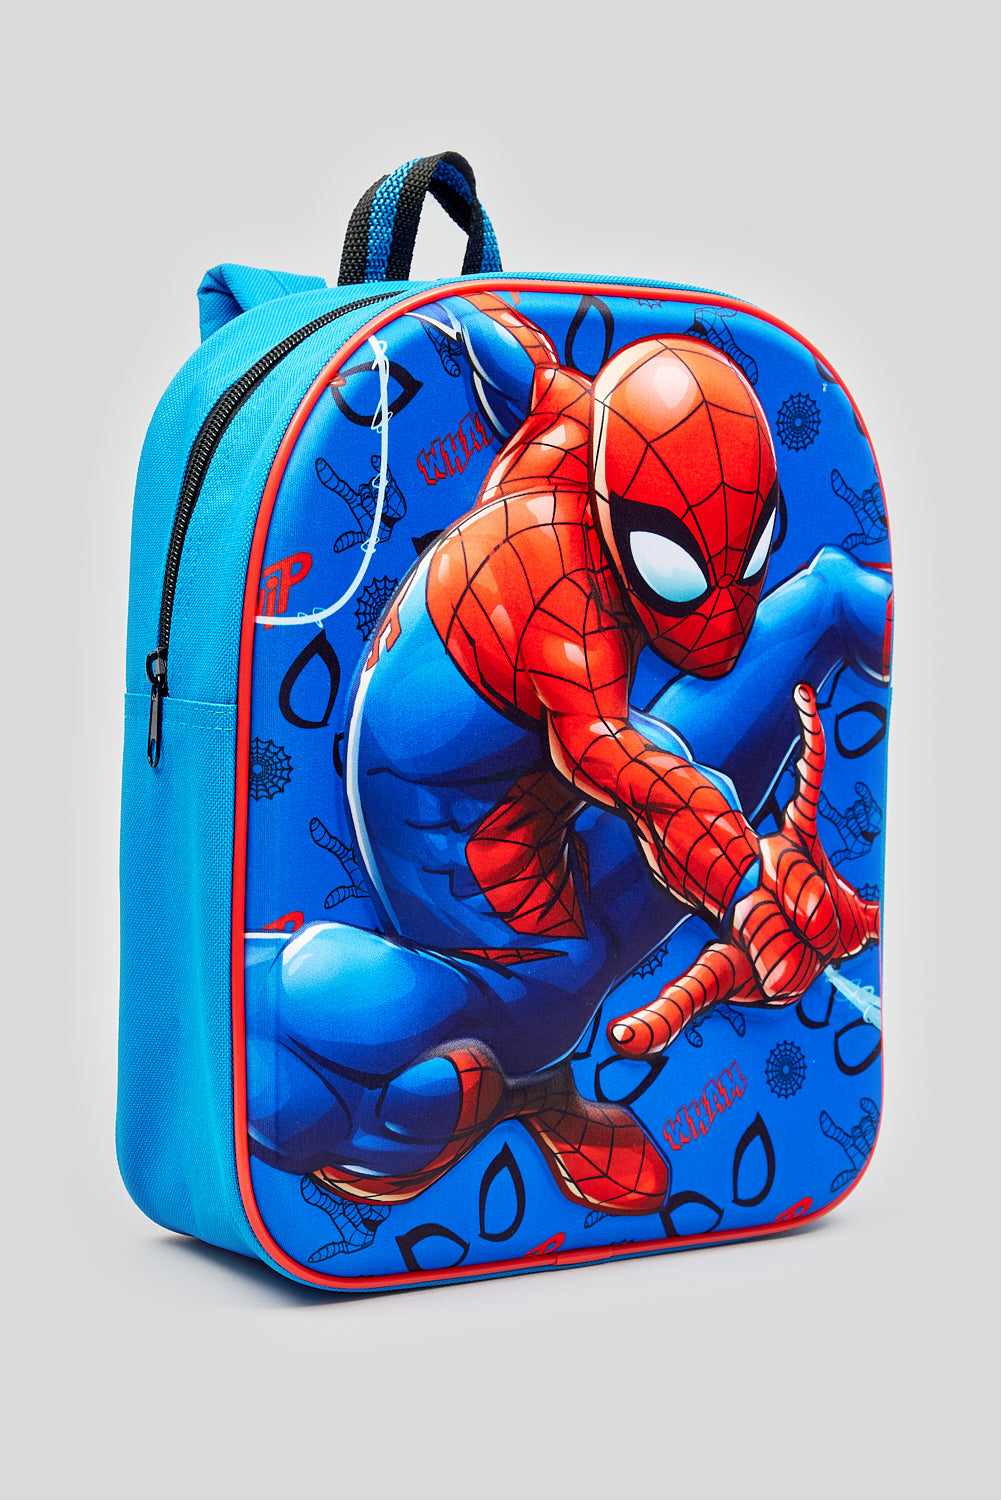 SPIDER-MAN BLUE & RED ICONS PATTERN EVA BACKPACK